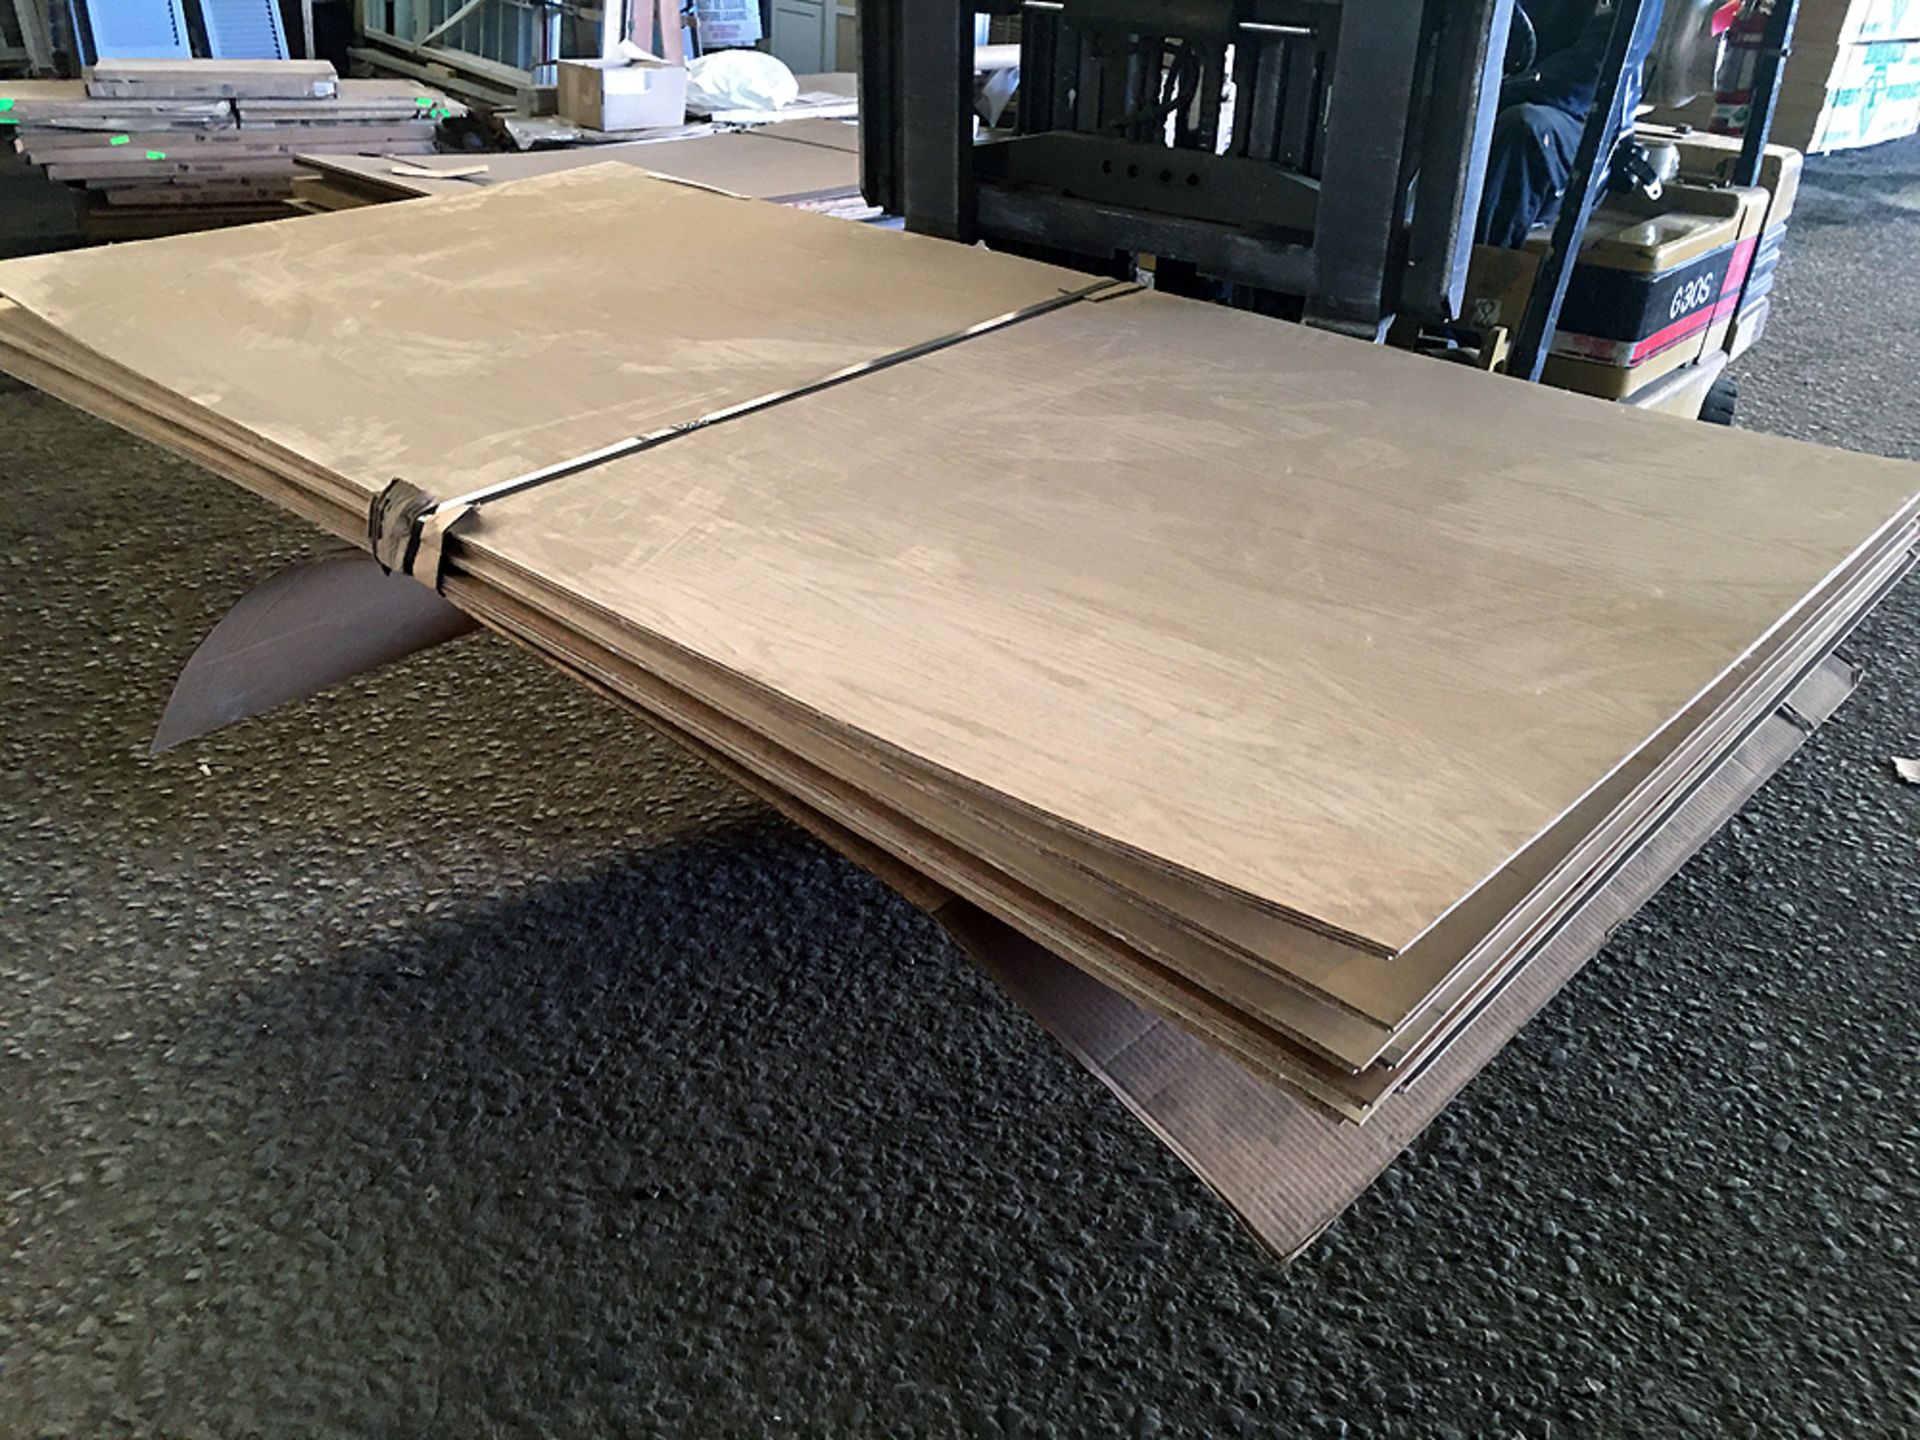 4'x8'x1/4" Thick Oak Plywood Boards